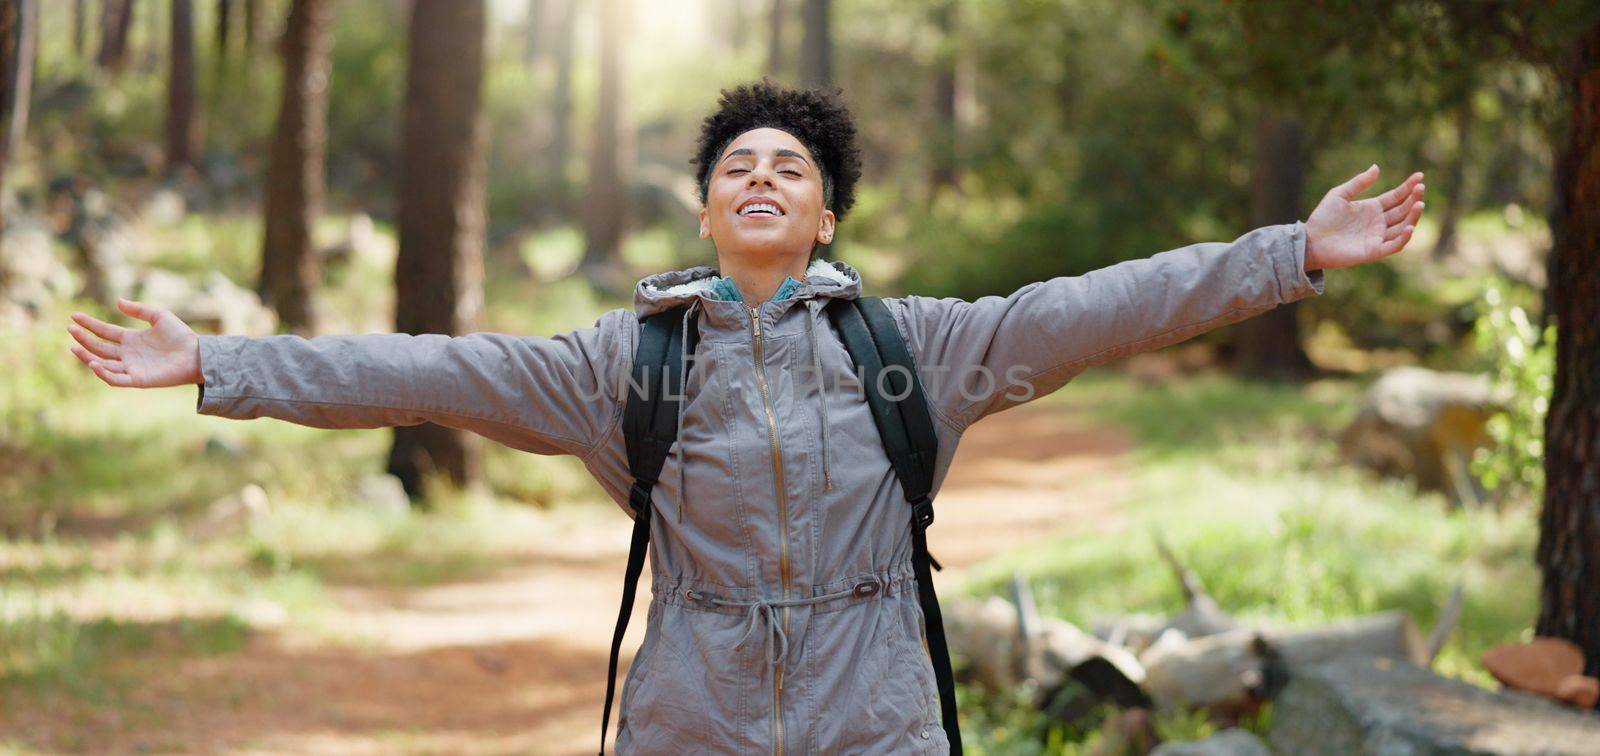 Beauty, sunshine and freedom for girl hiking in nature forest or woods for peace, fitness exercise or training workout. Travel adventure, wellness journey or black woman trekking in Amazon Rainforest.